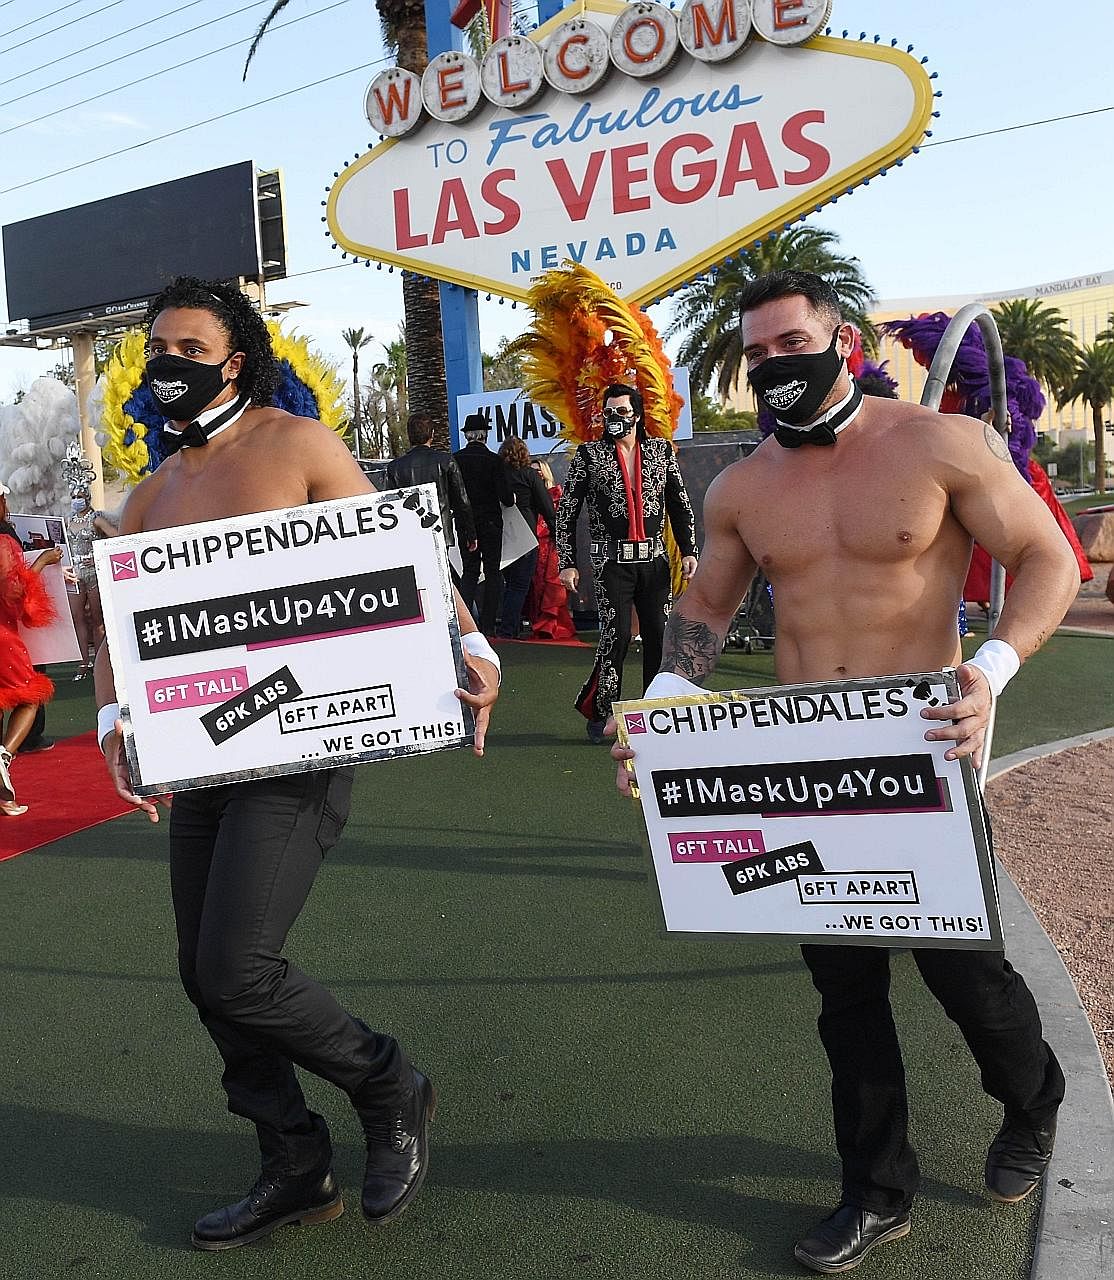 Las Vegas entertainers kicking off a pro-mask wearing campaign at a fashion show in Nevada's gambling hub on Thursday. PHOTO: AGENCE FRANCE-PRESSE